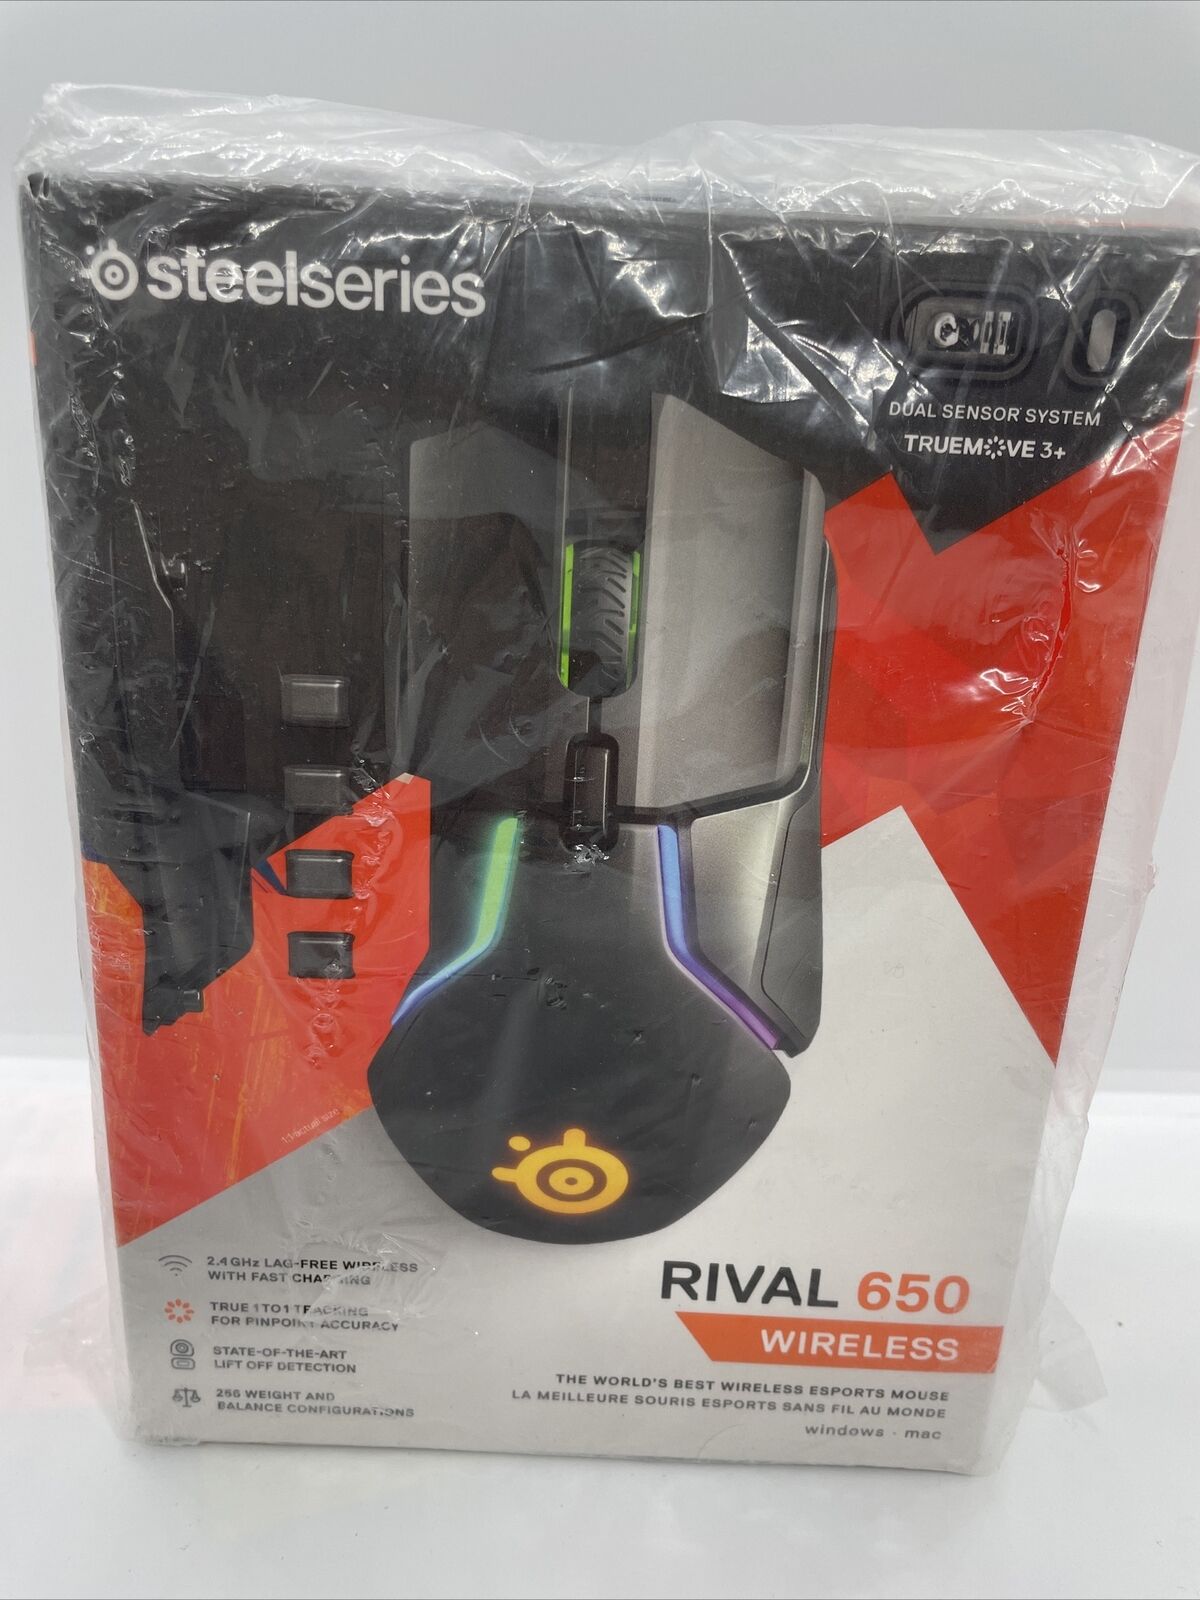 SteelSeries Rival 650 Wireless Gaming Mouse 1ms Report Rate Truemove3+